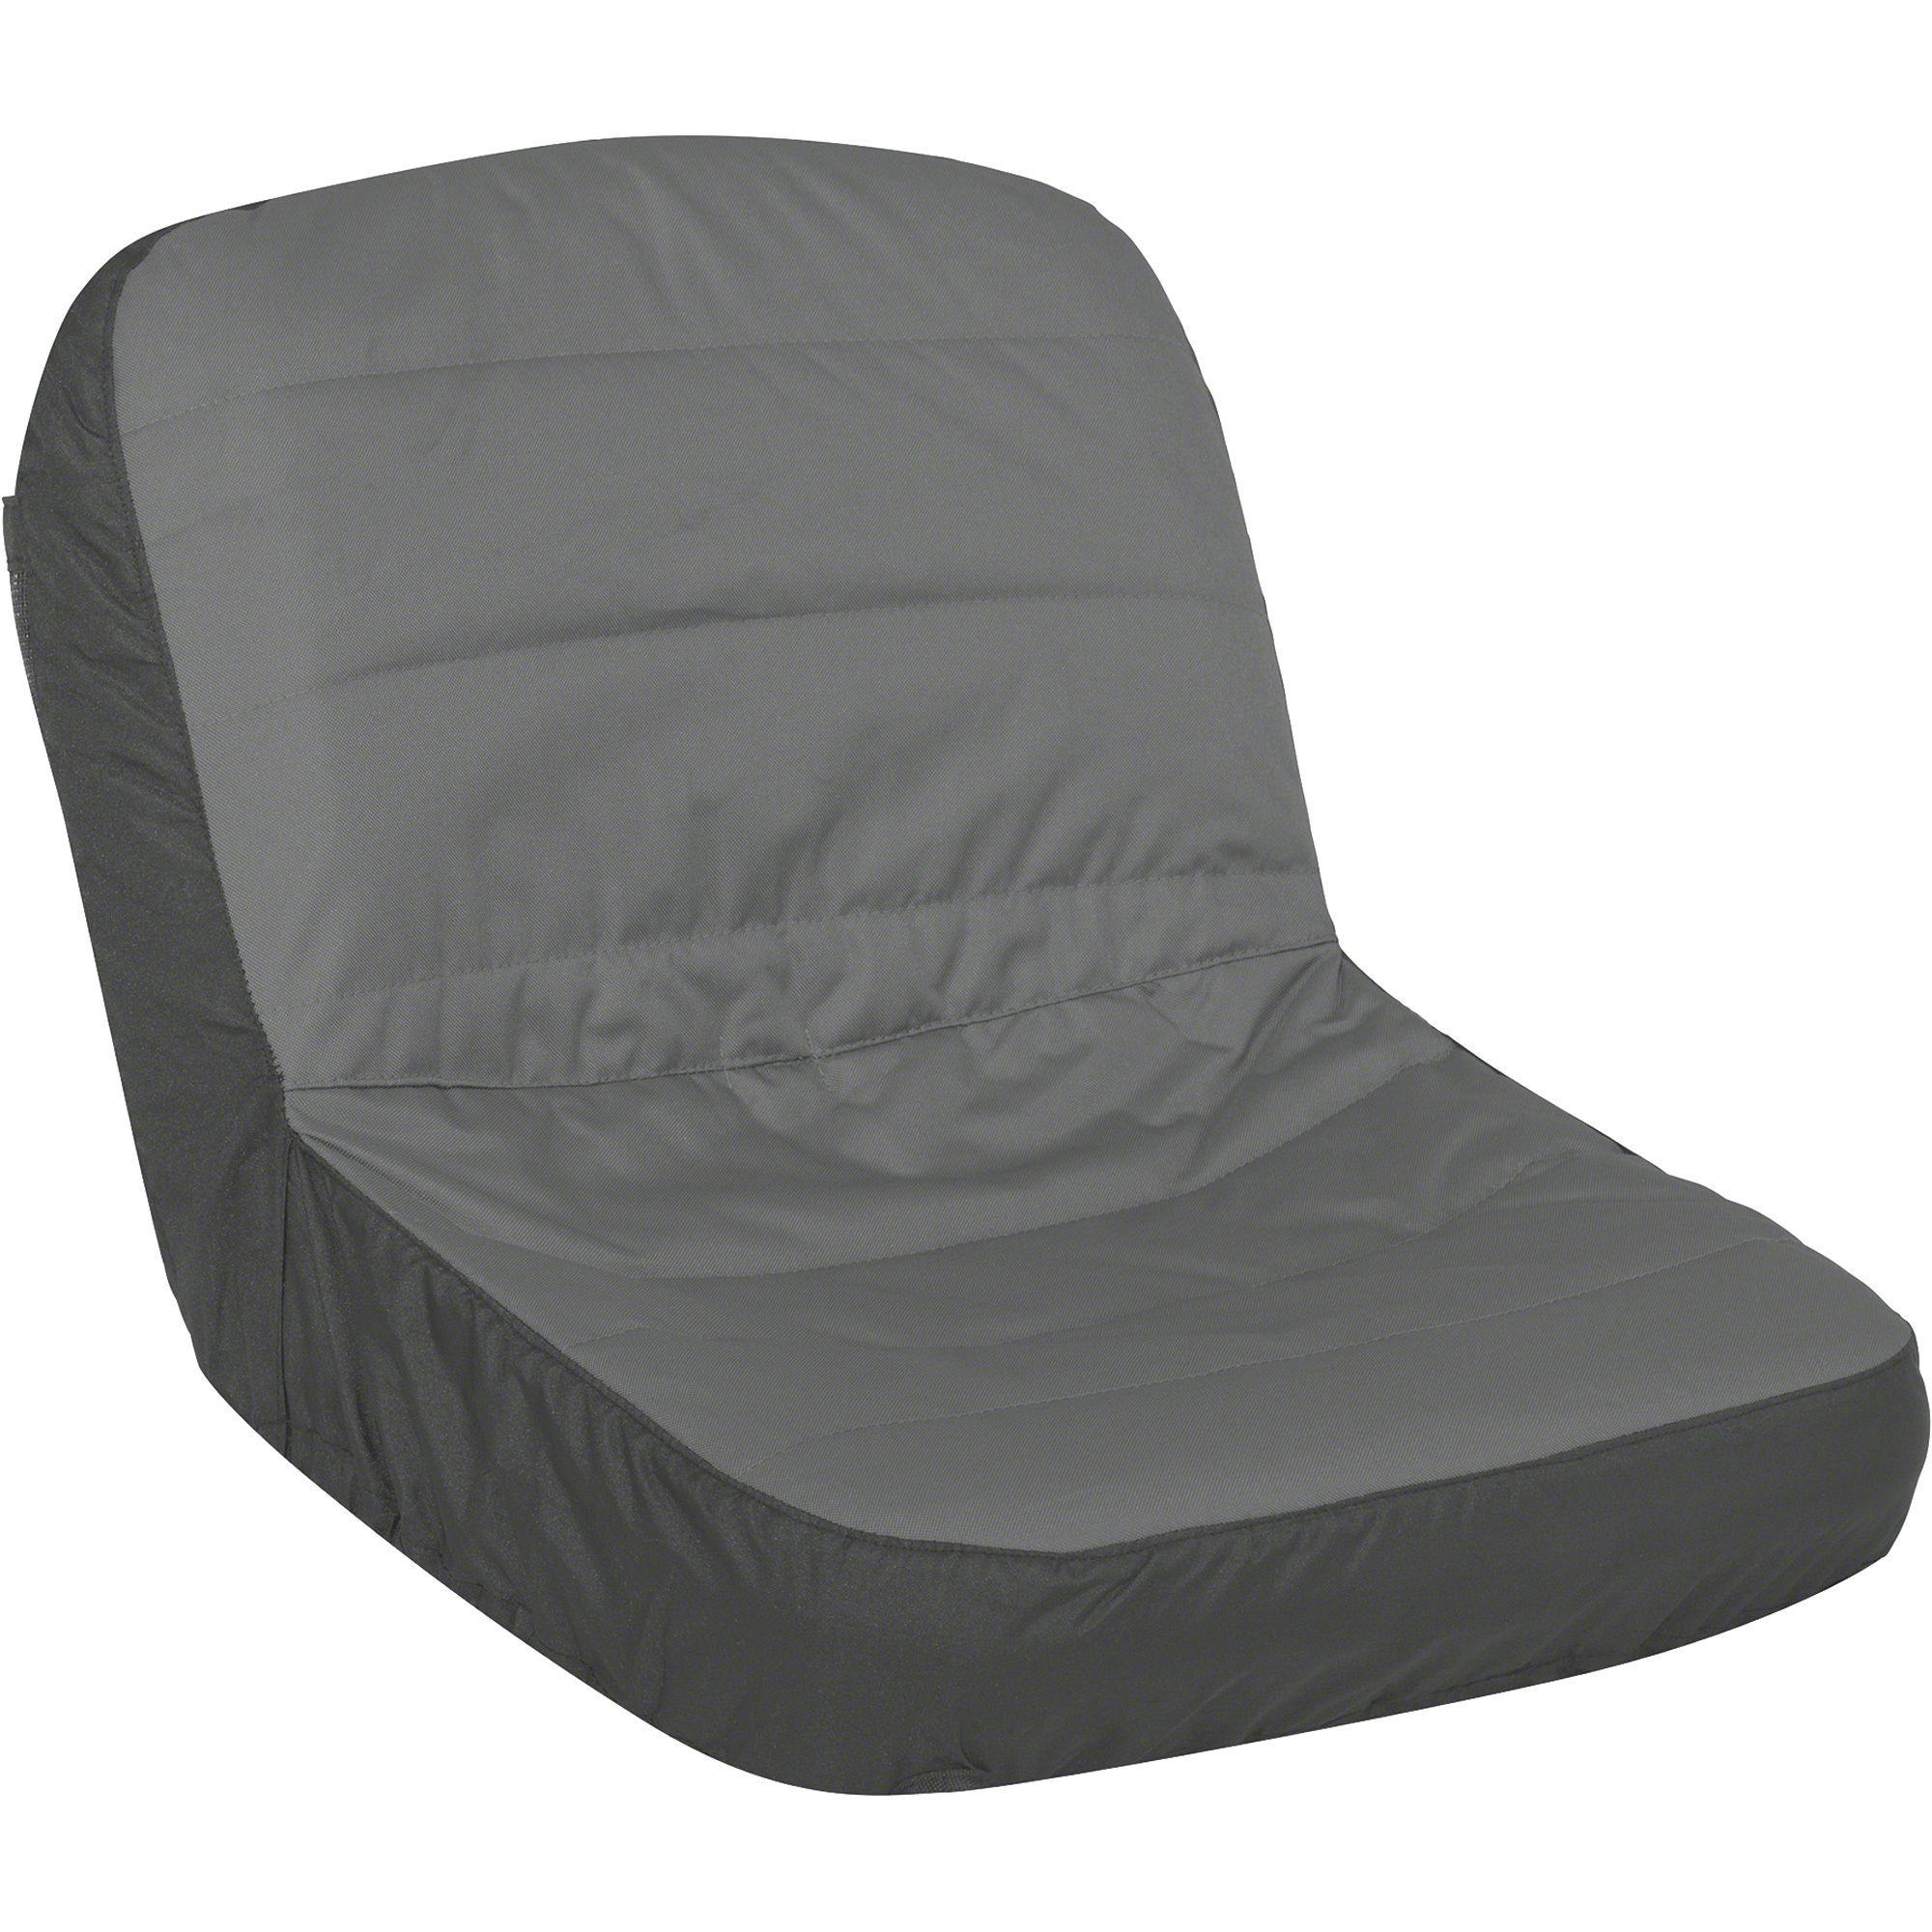 Classic Accessories Deluxe Tractor Seat Cover, Large, Model 52-152-043201-RT